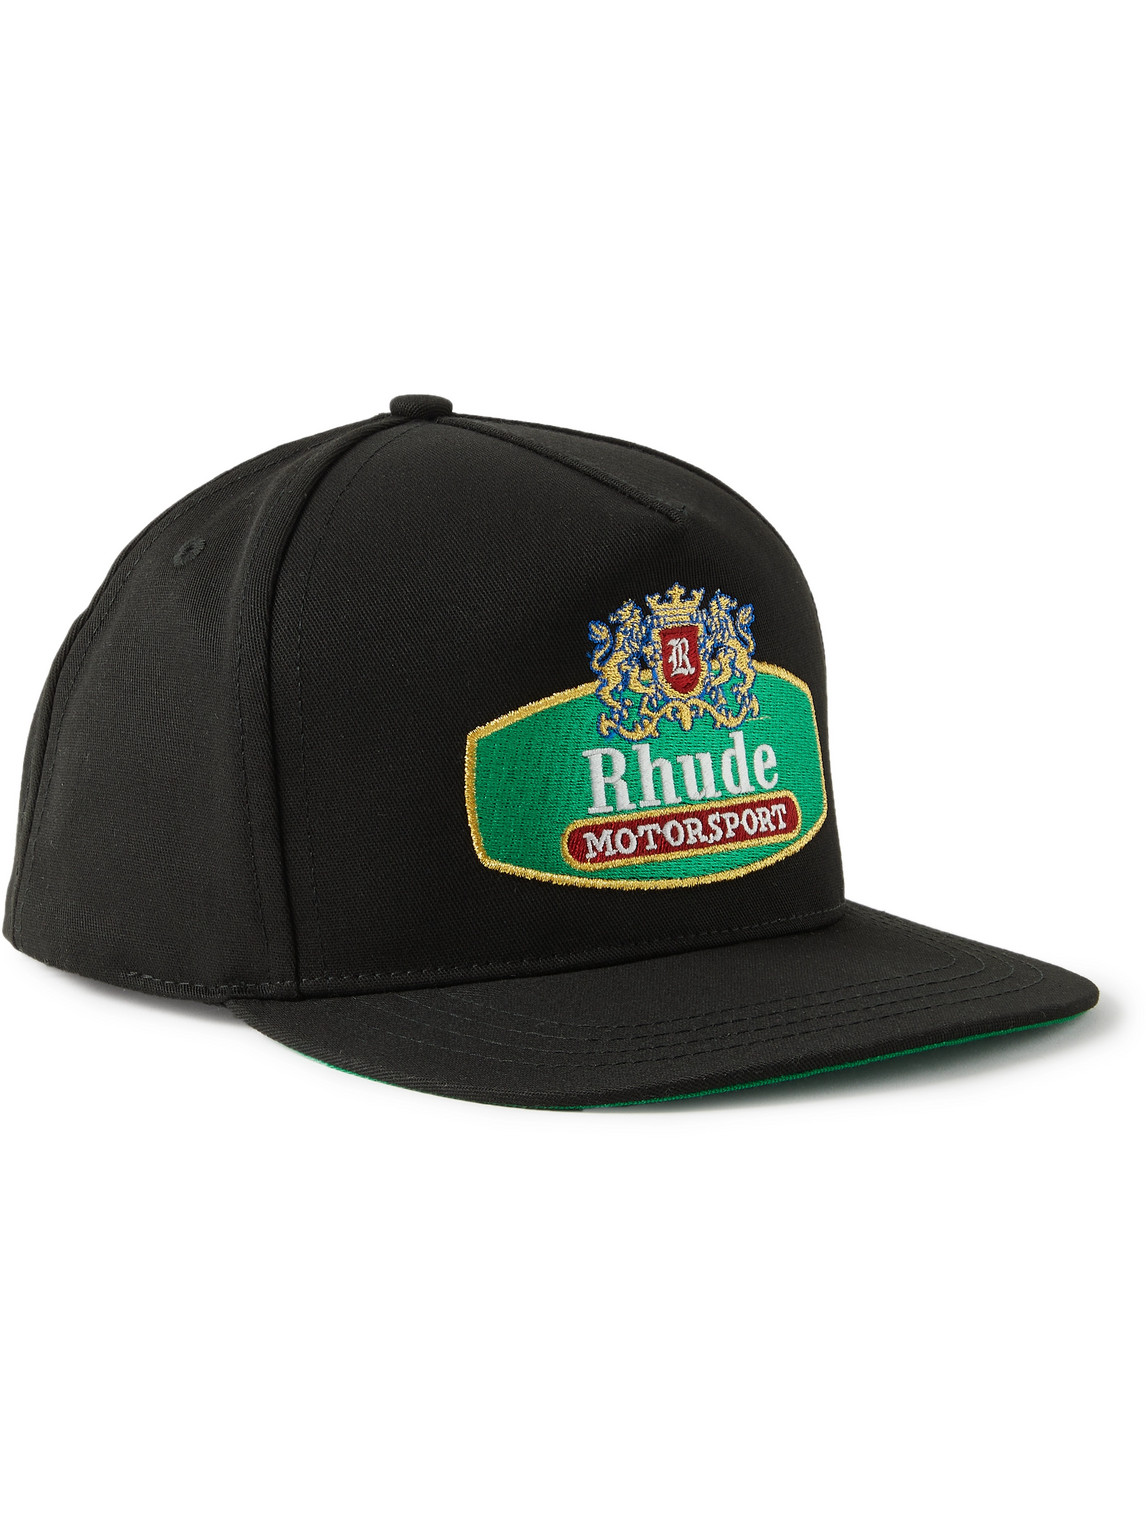 Racing Crest Logo-Embroidered Twill Trucker Cap